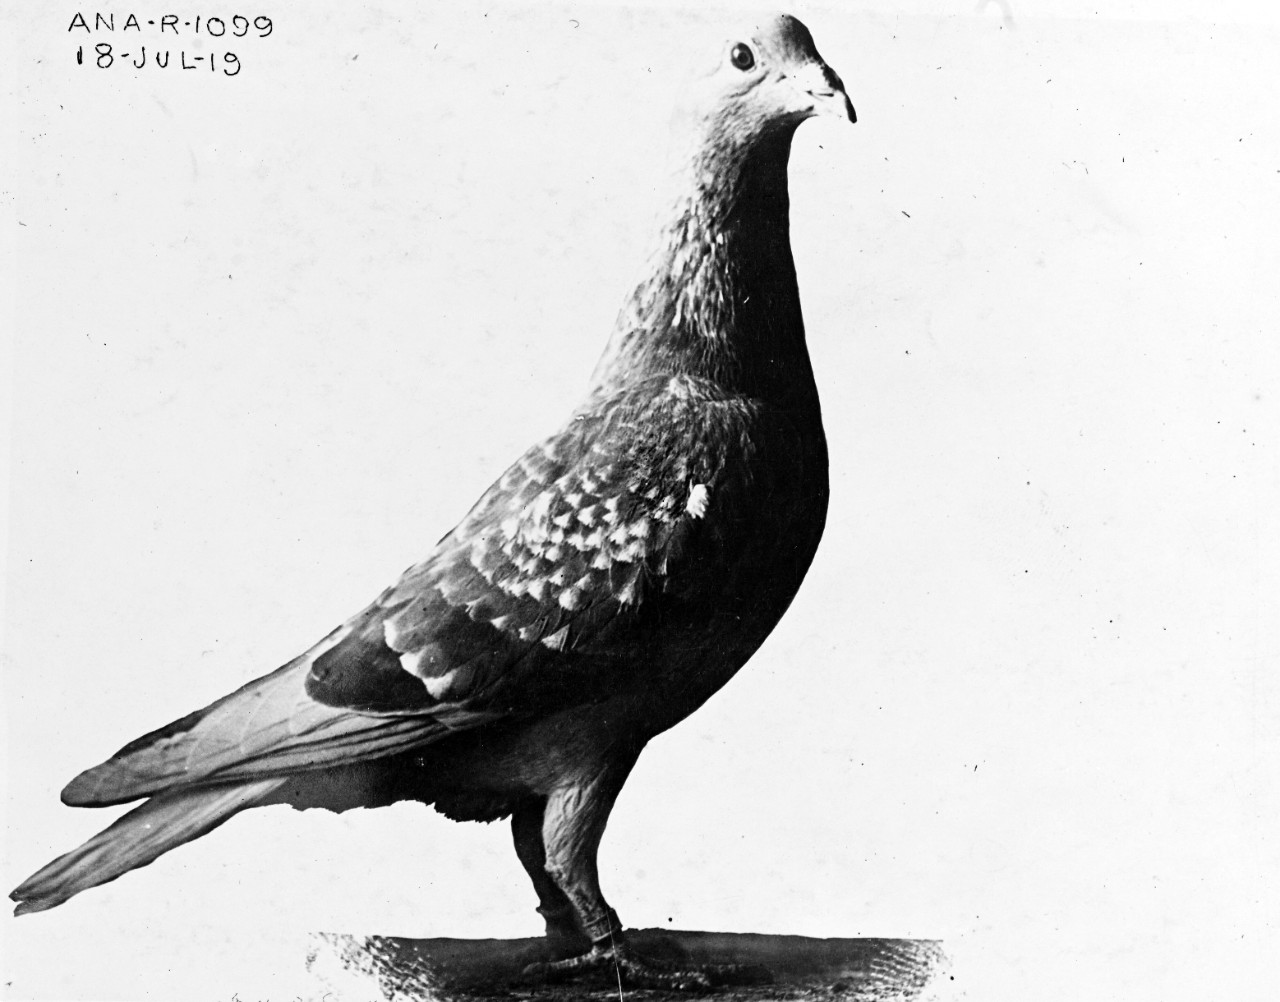 Photo of a celebrated naval homing pigeon